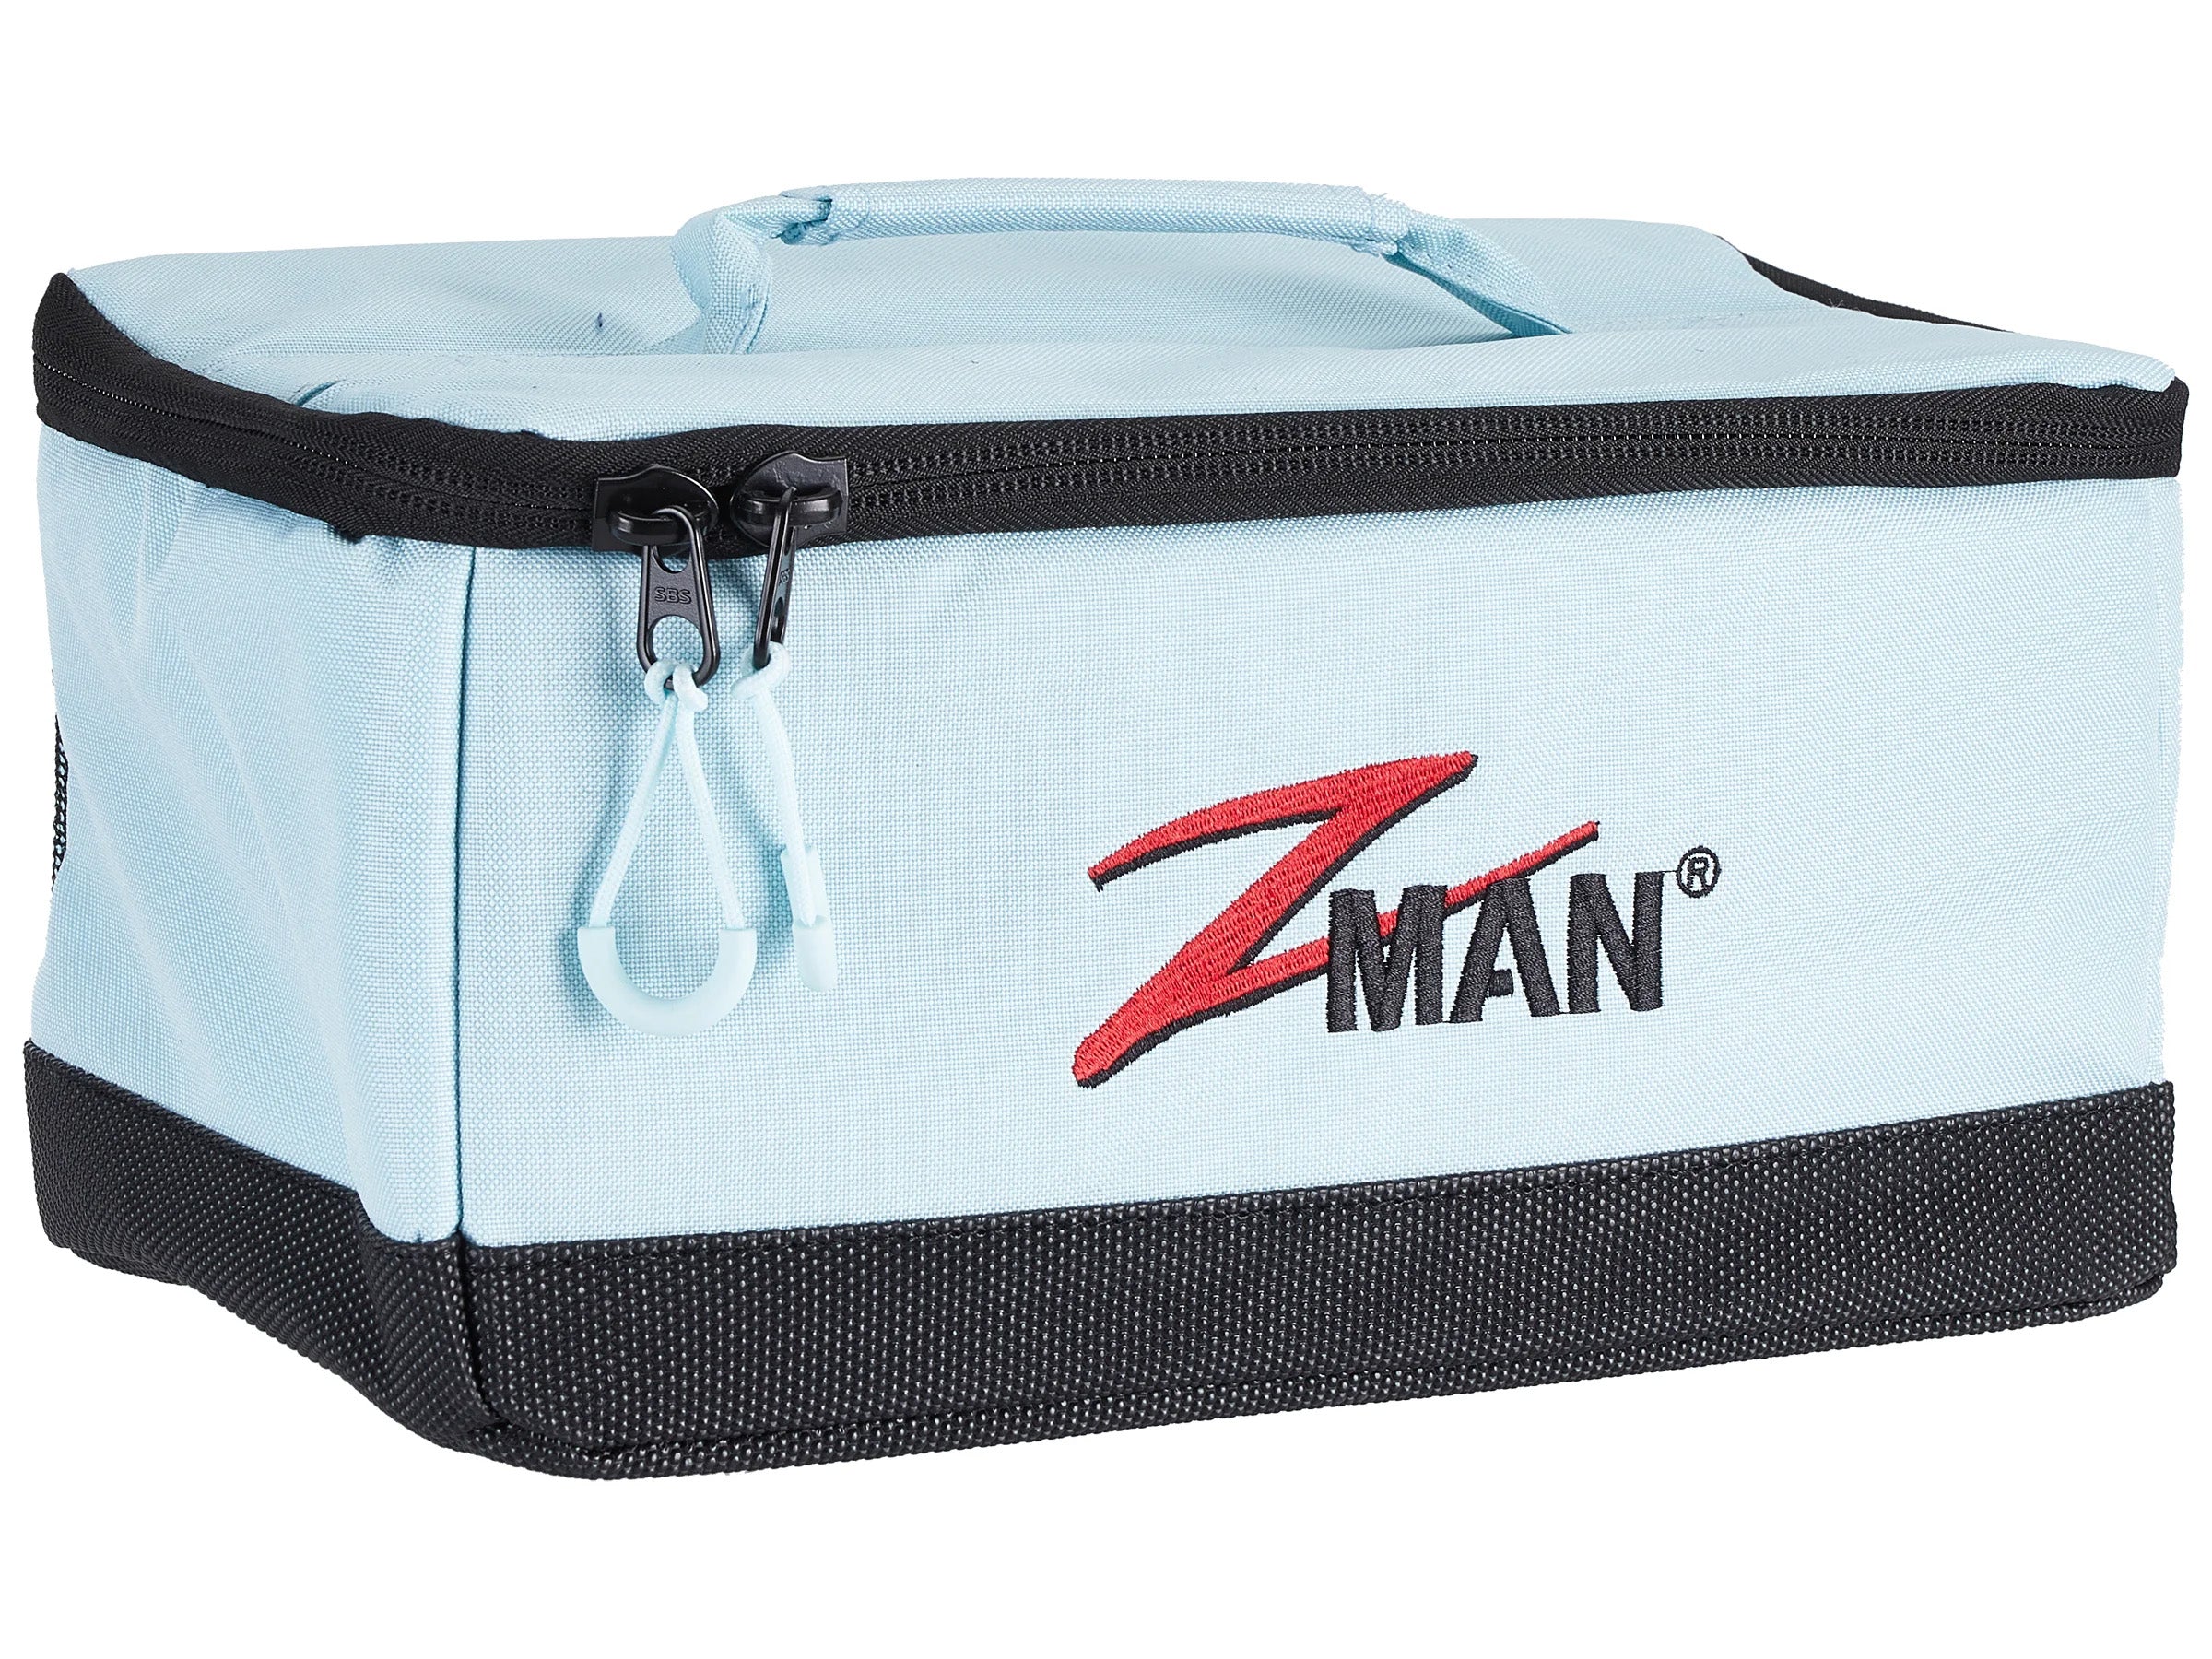 The ultimate tackle storage by Z-Man